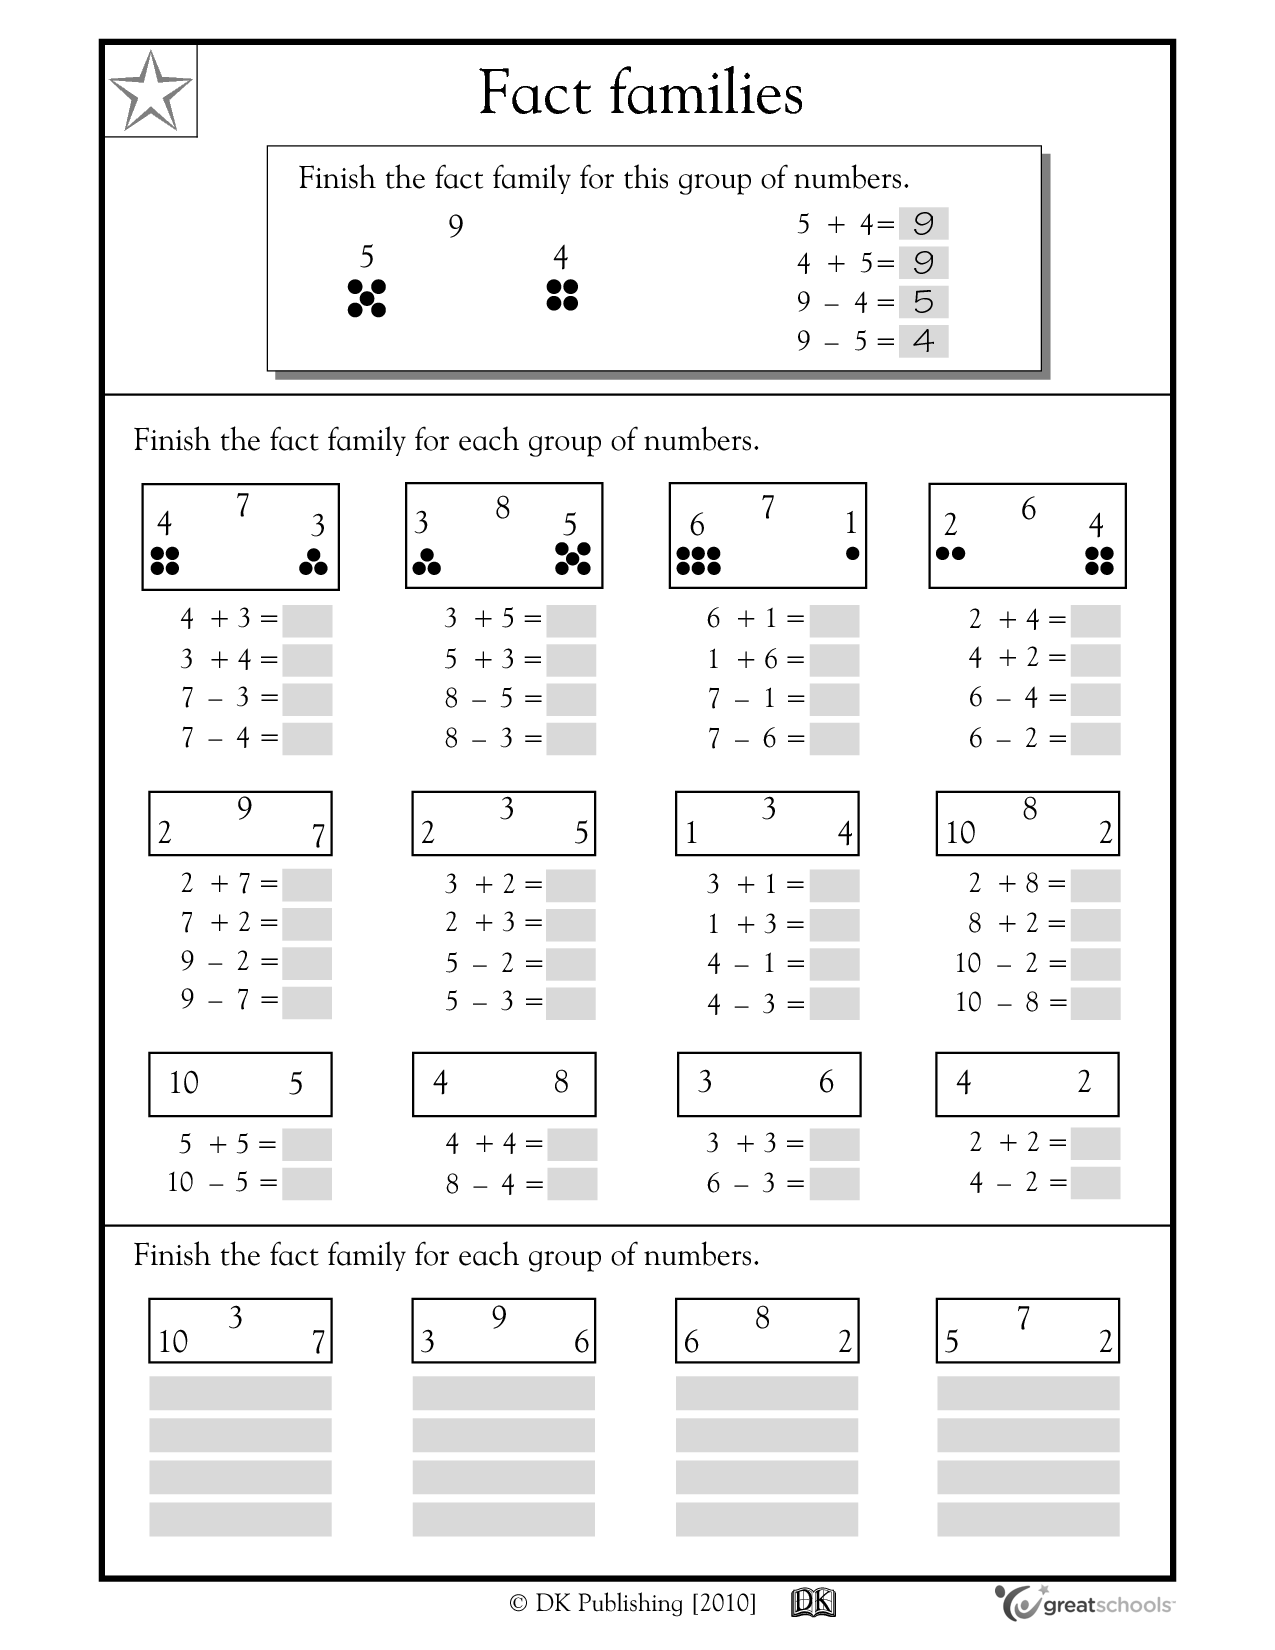 Addition Subtraction Fact Family Worksheet